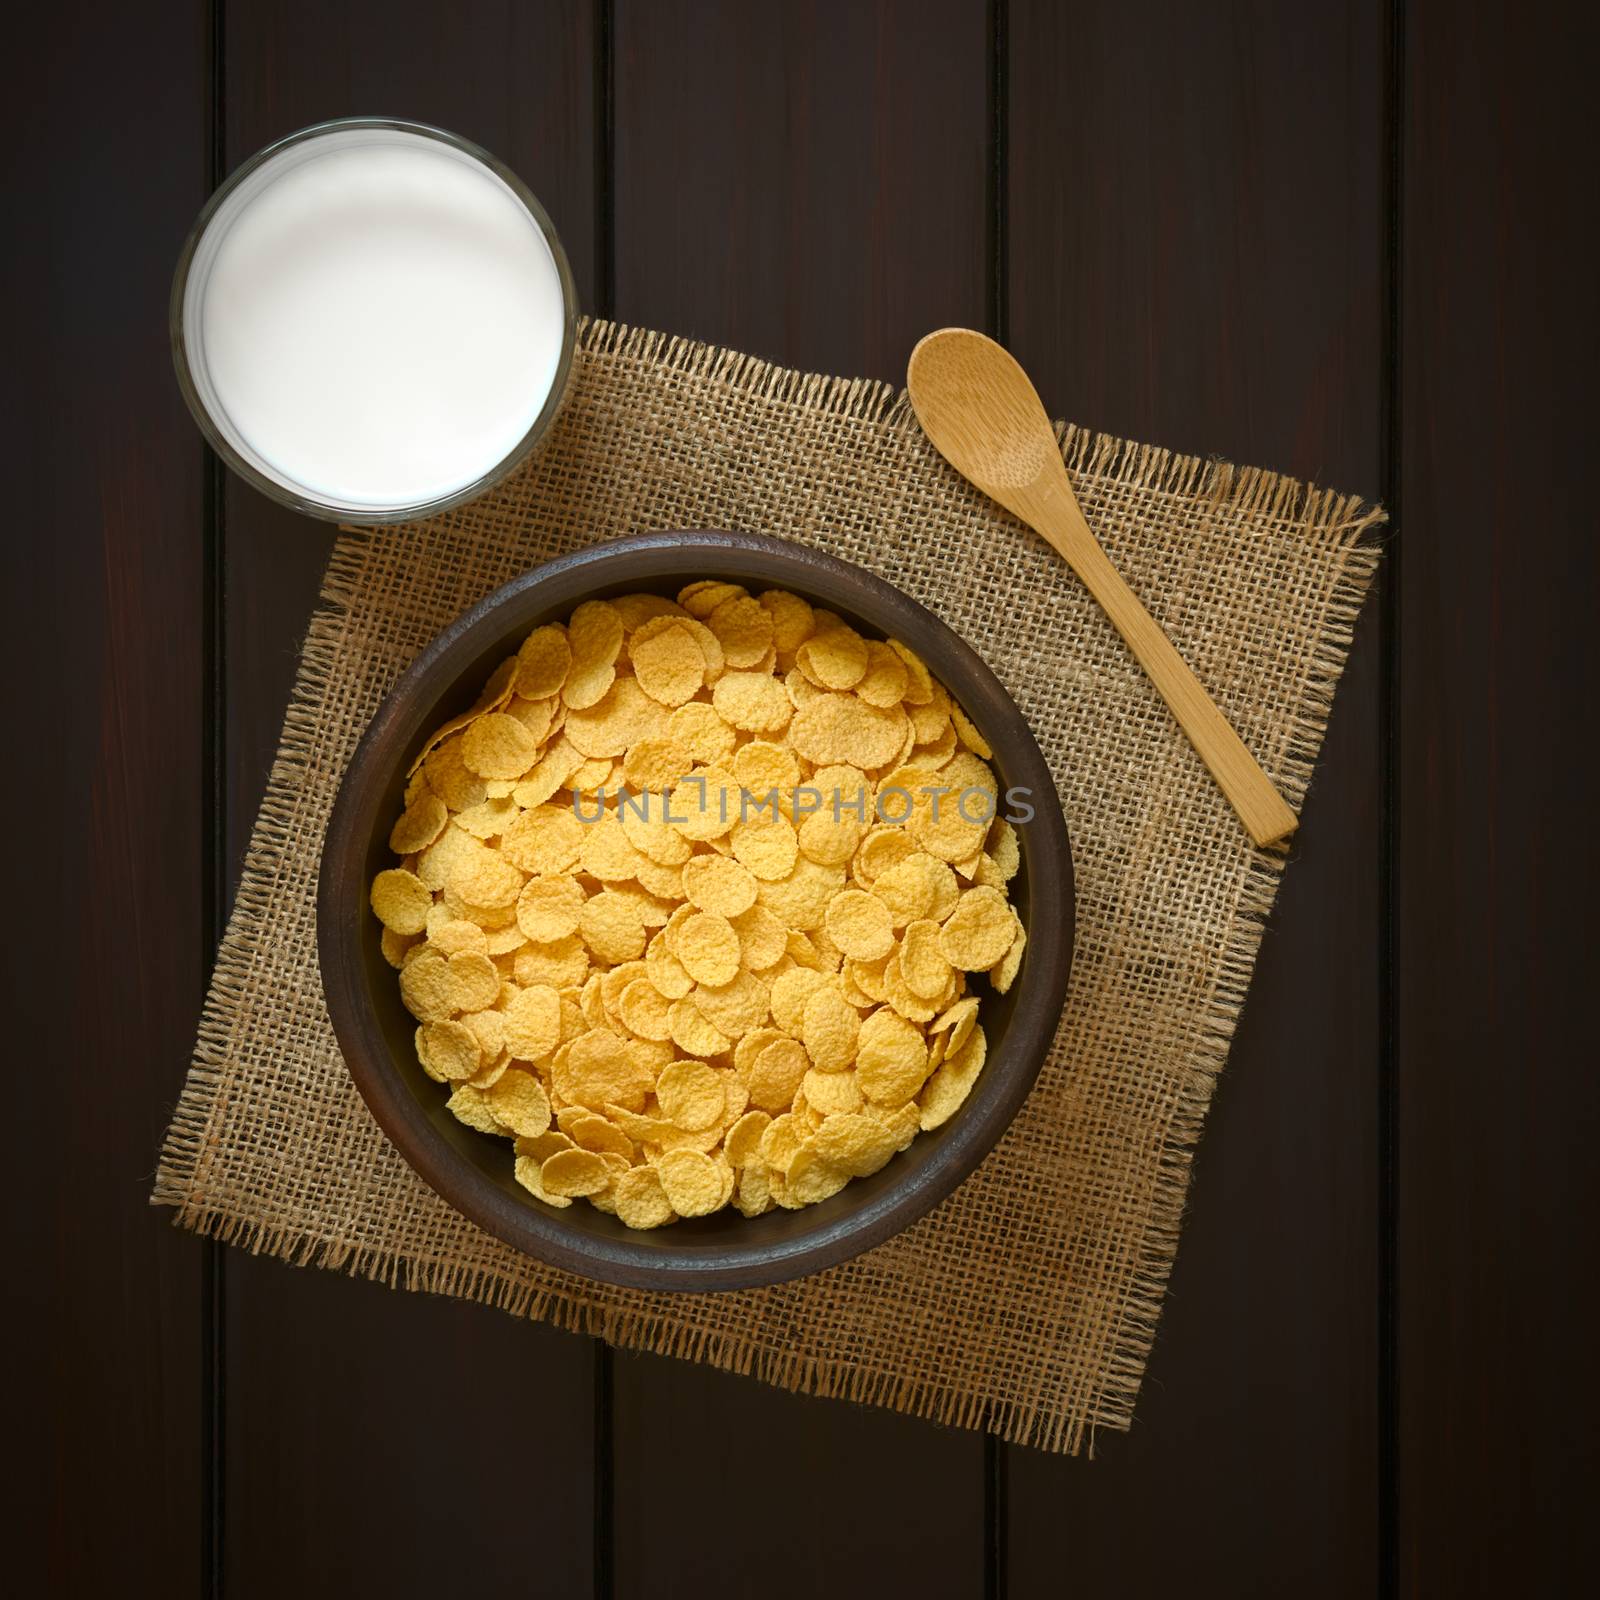 Corn Flakes Breakfast Cereal and Milk by ildi